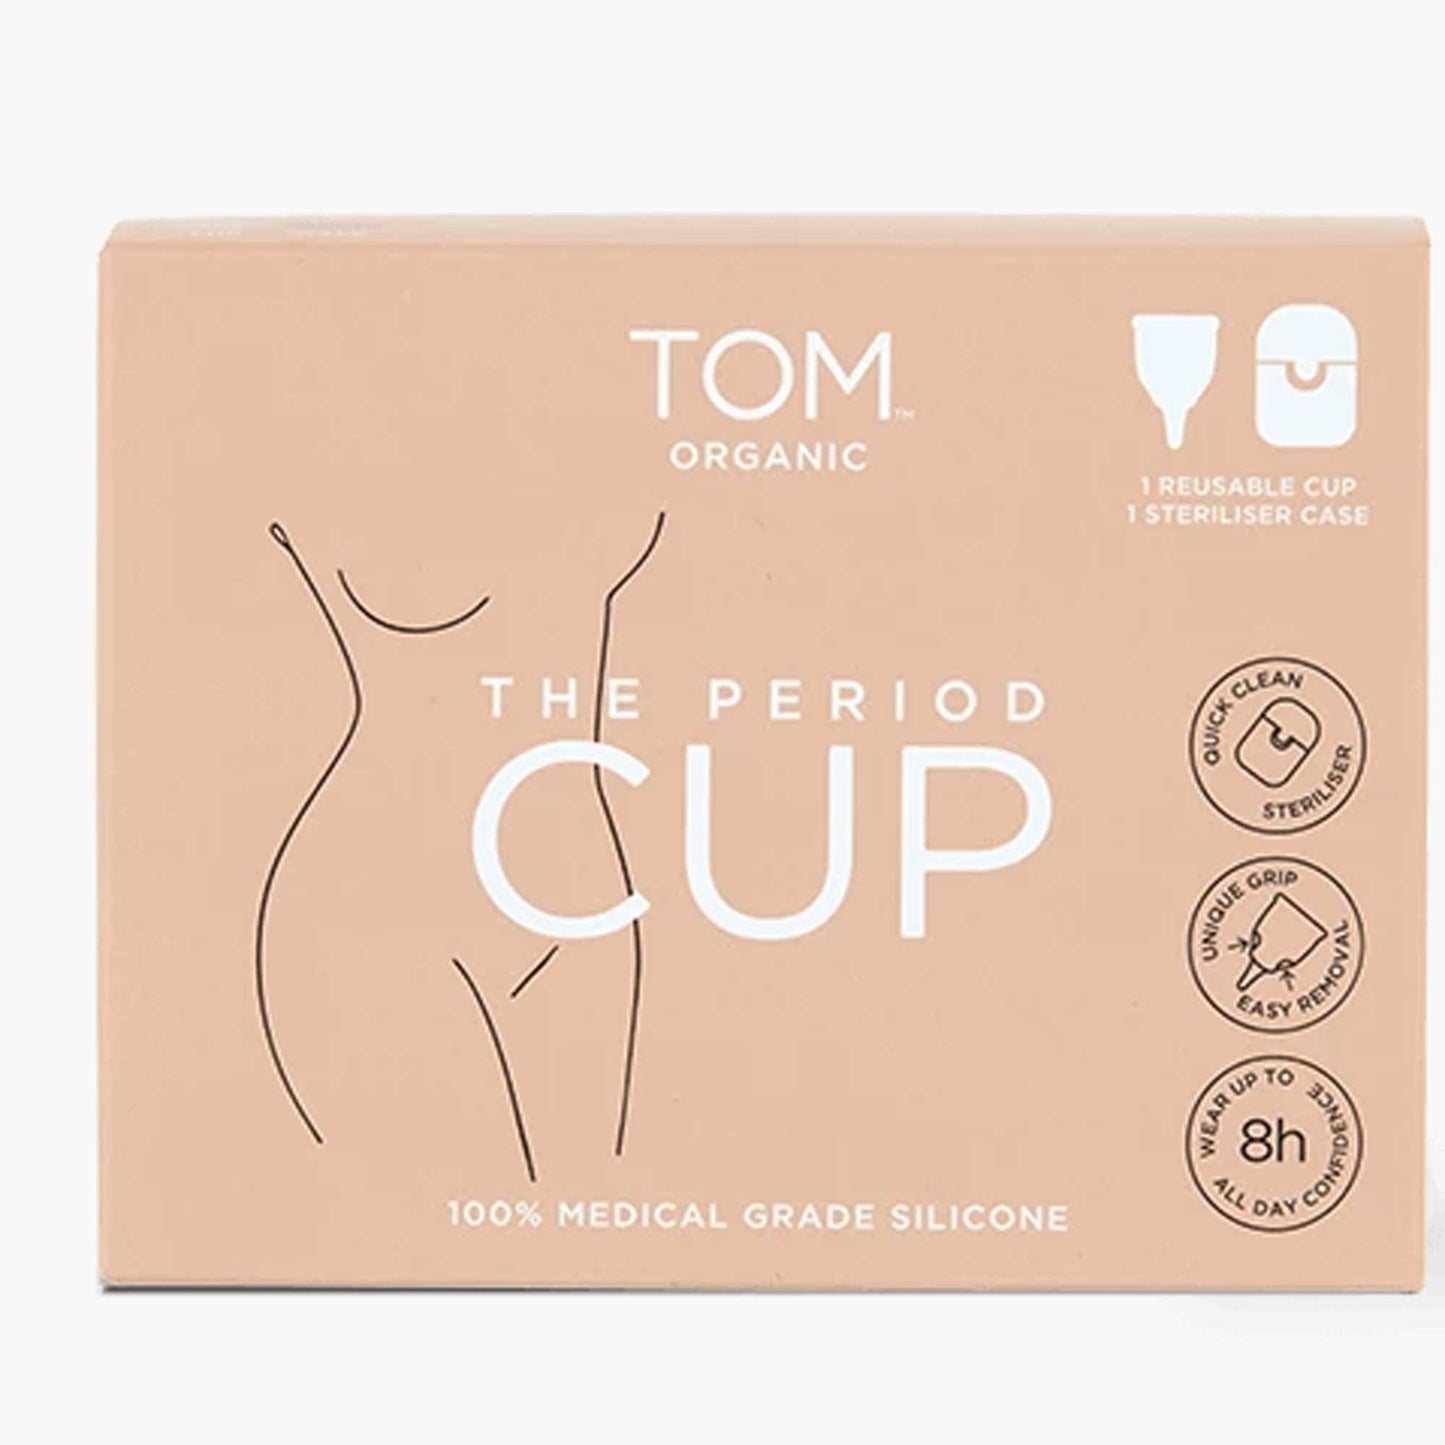 box of the tom organic reusable period cup.